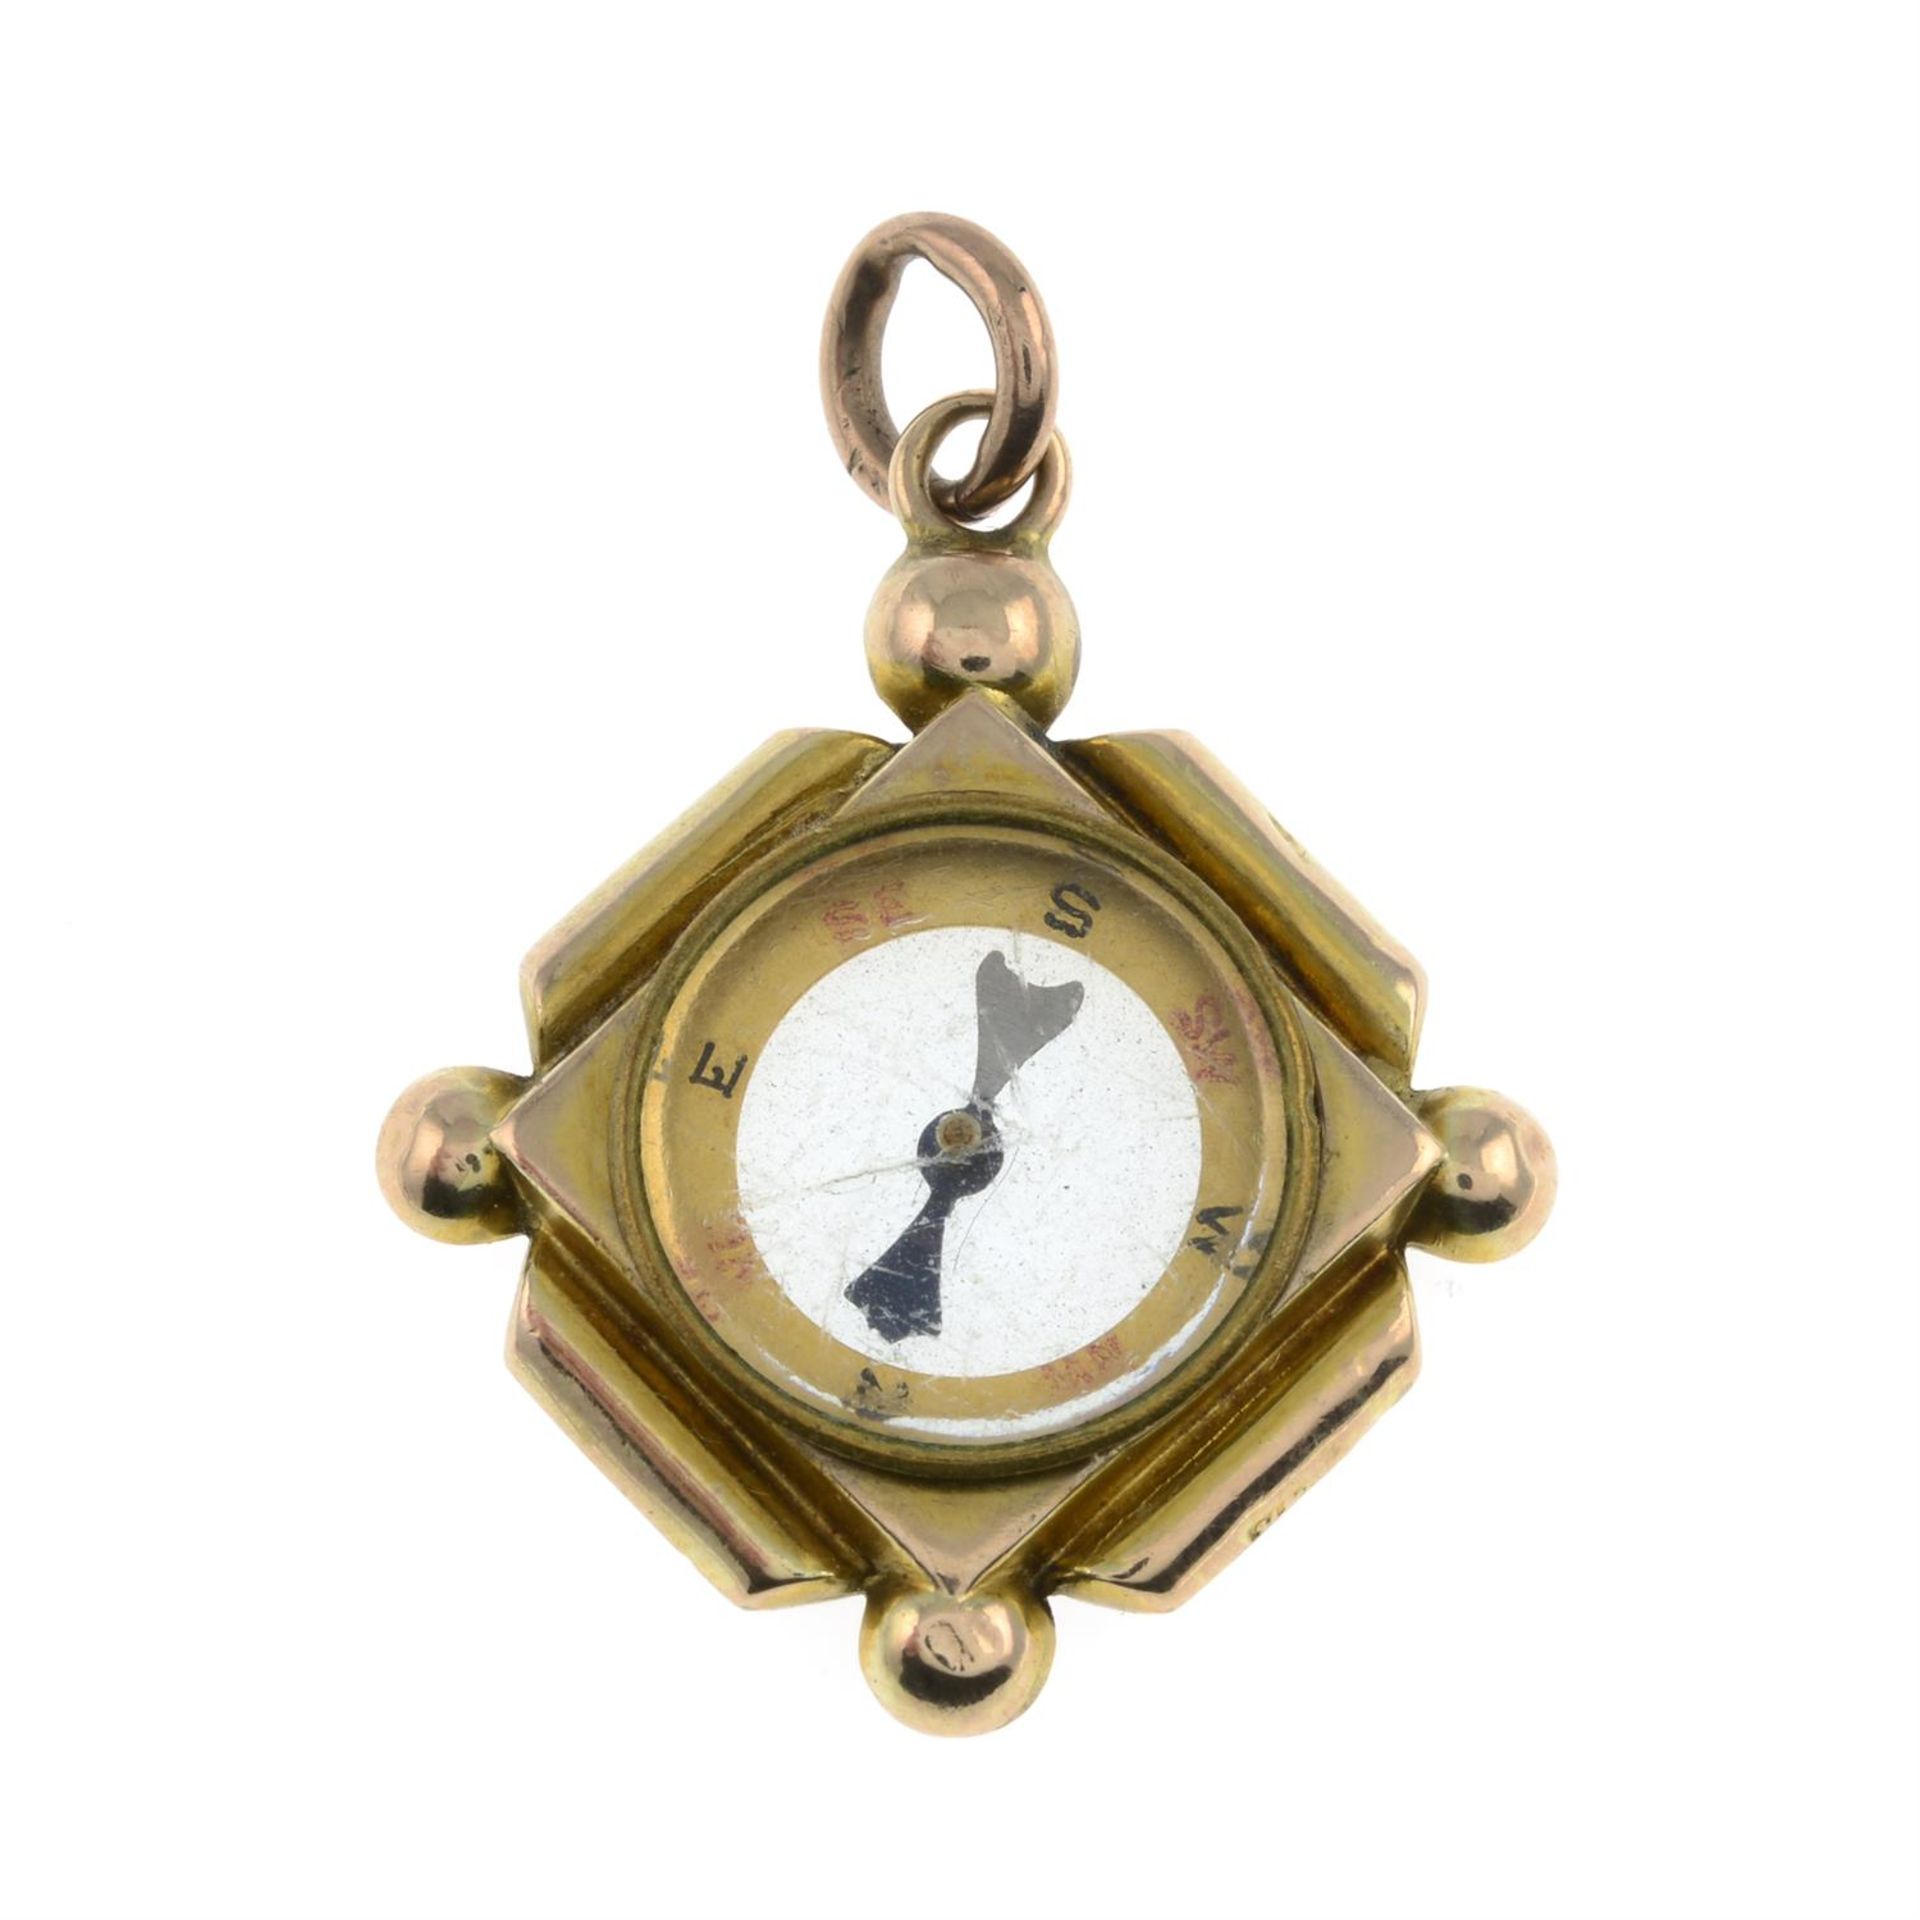 Early 20th century gold compass charm